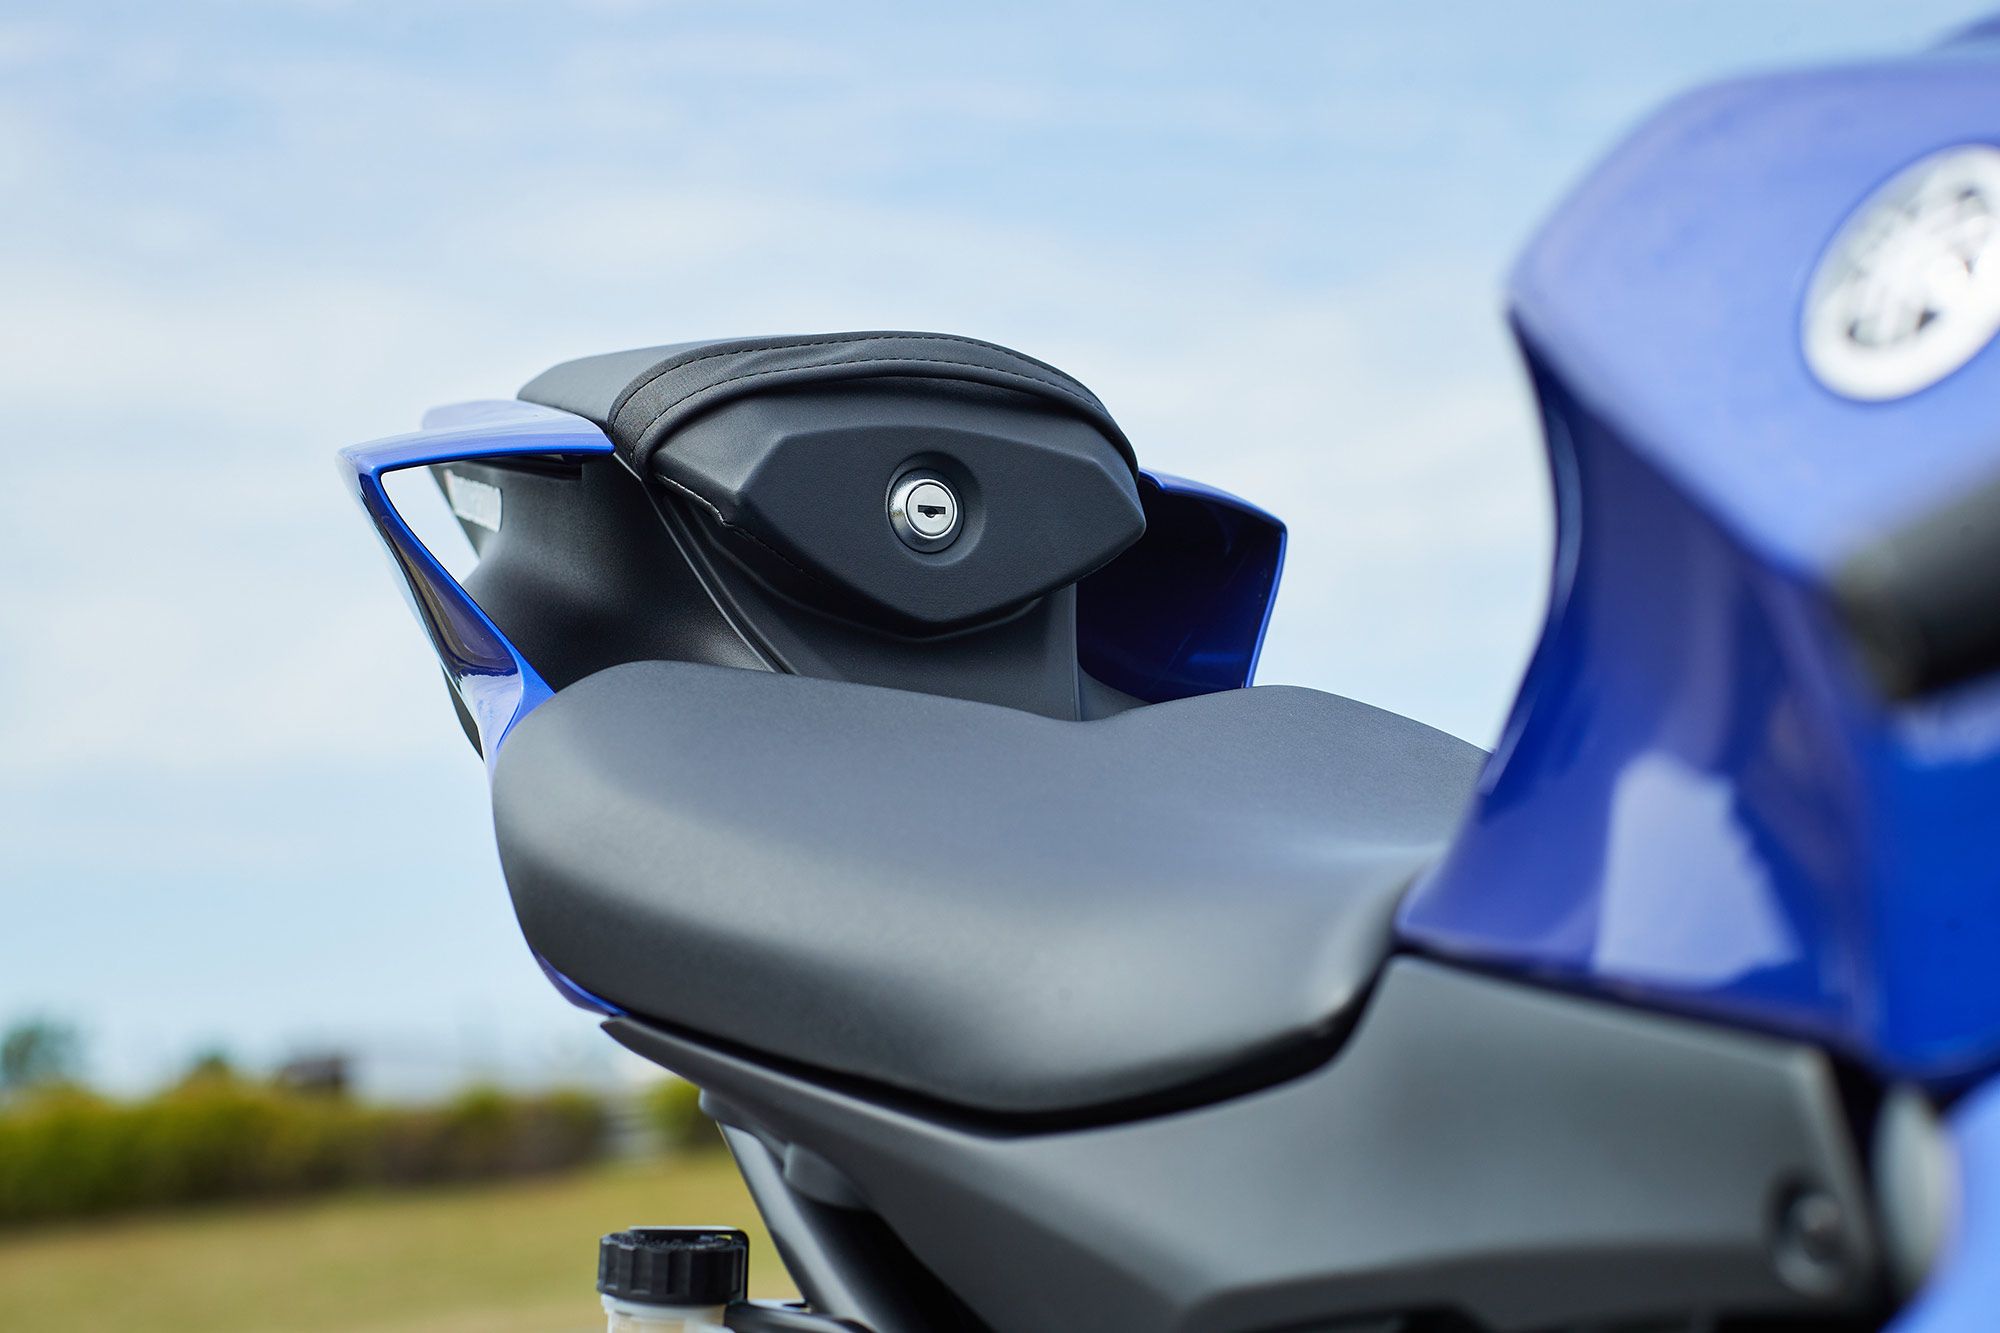 Shaped like the outgoing R6, the R7’s saddle is much thicker which will boost comfort for street riders.